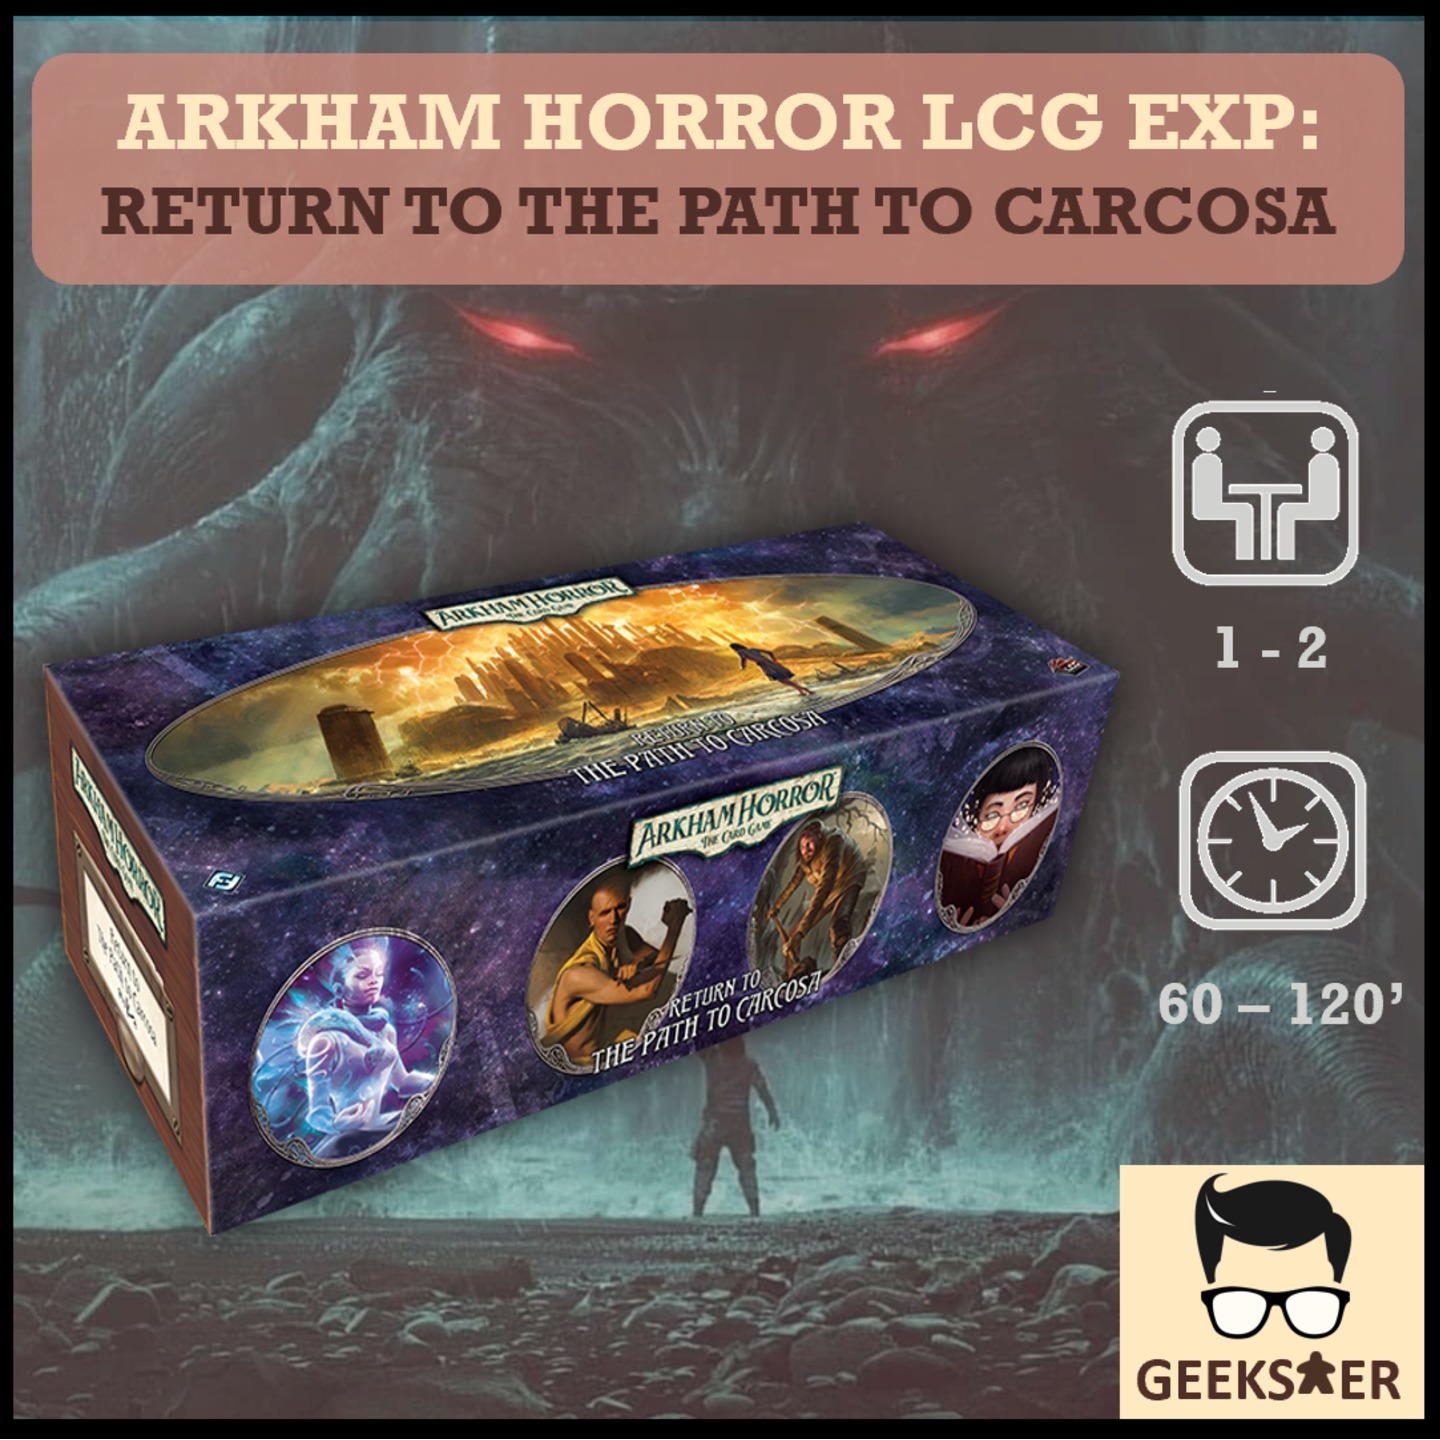 Arkham Horror LCG Exp - Return to the Path to Carcosa